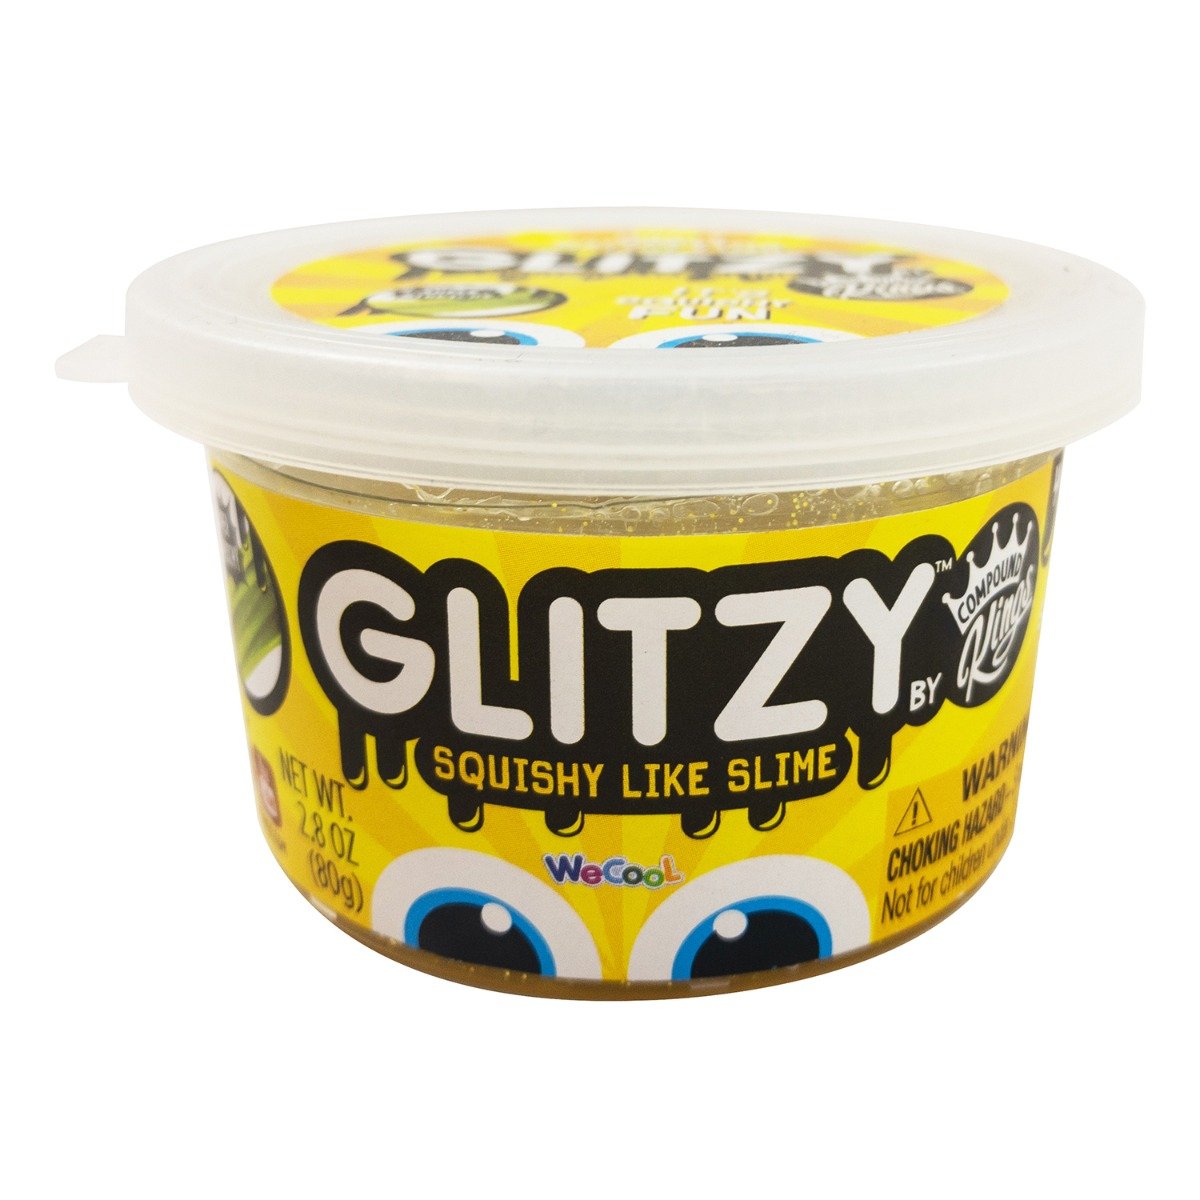 Gelatina Compound Kings – Glitzy Slime, Gold, 80 g Compound Kings